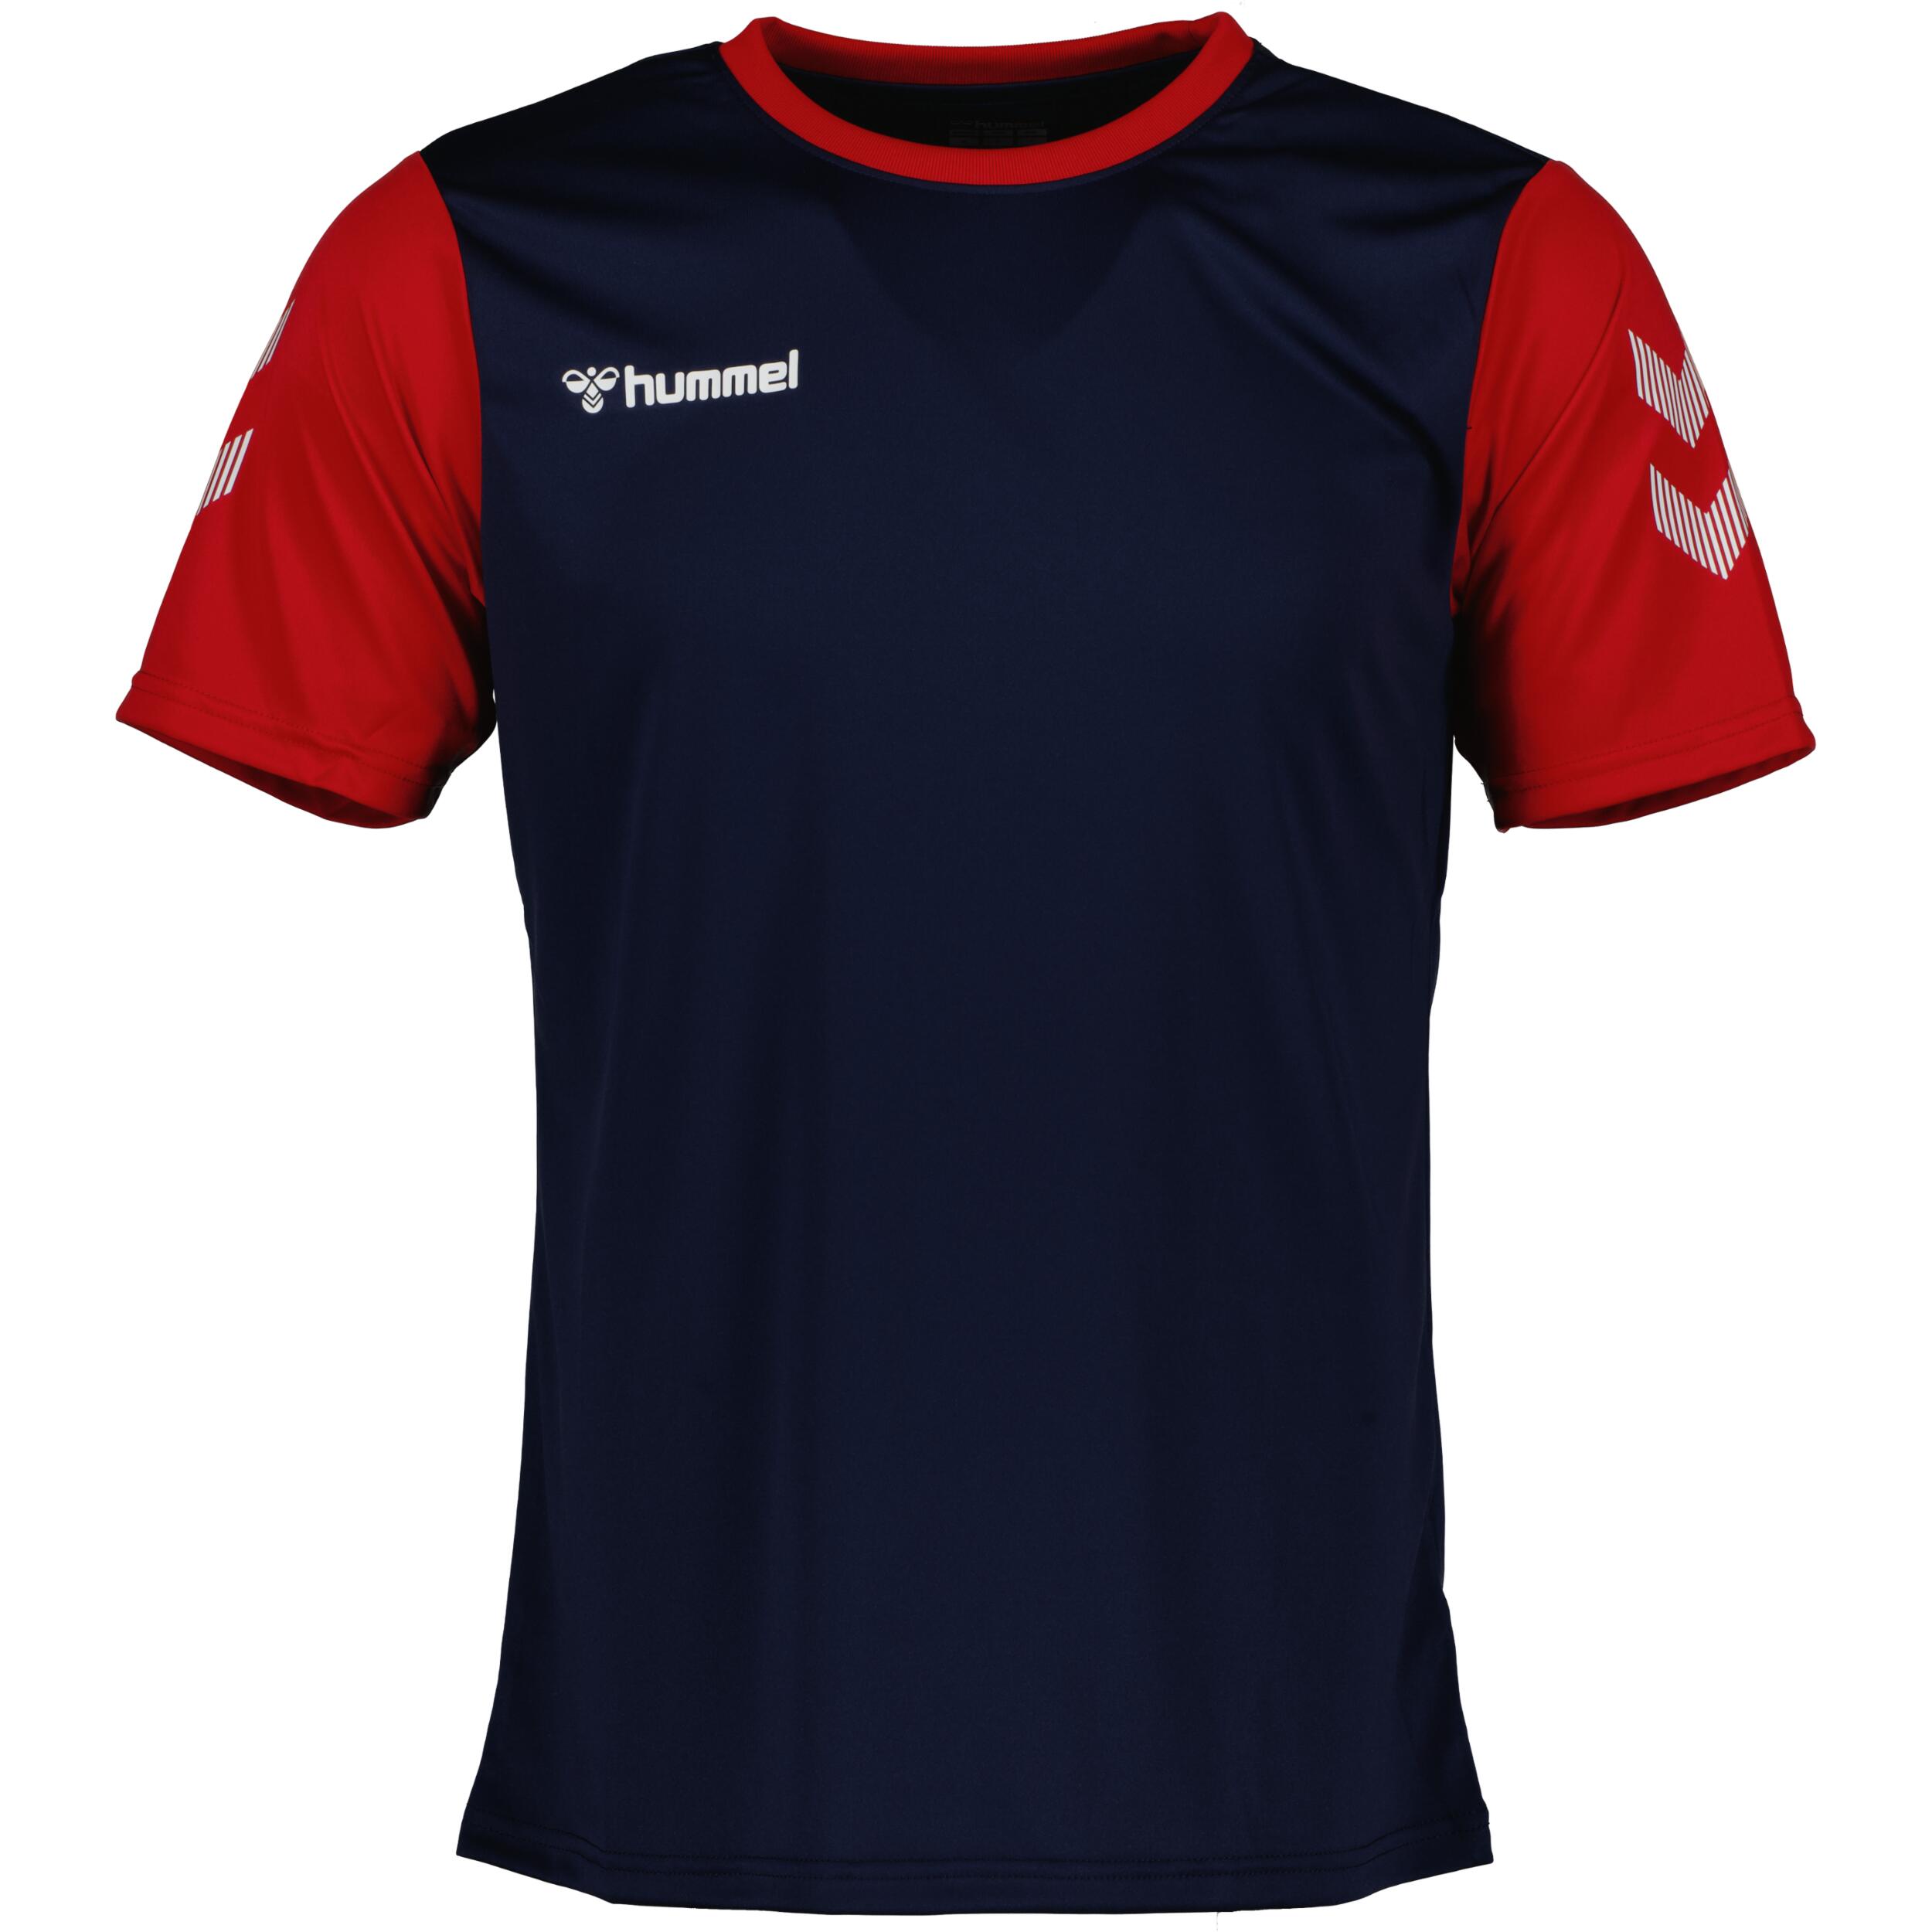 HUMMEL Match jersey for men, great for football, in marine/red